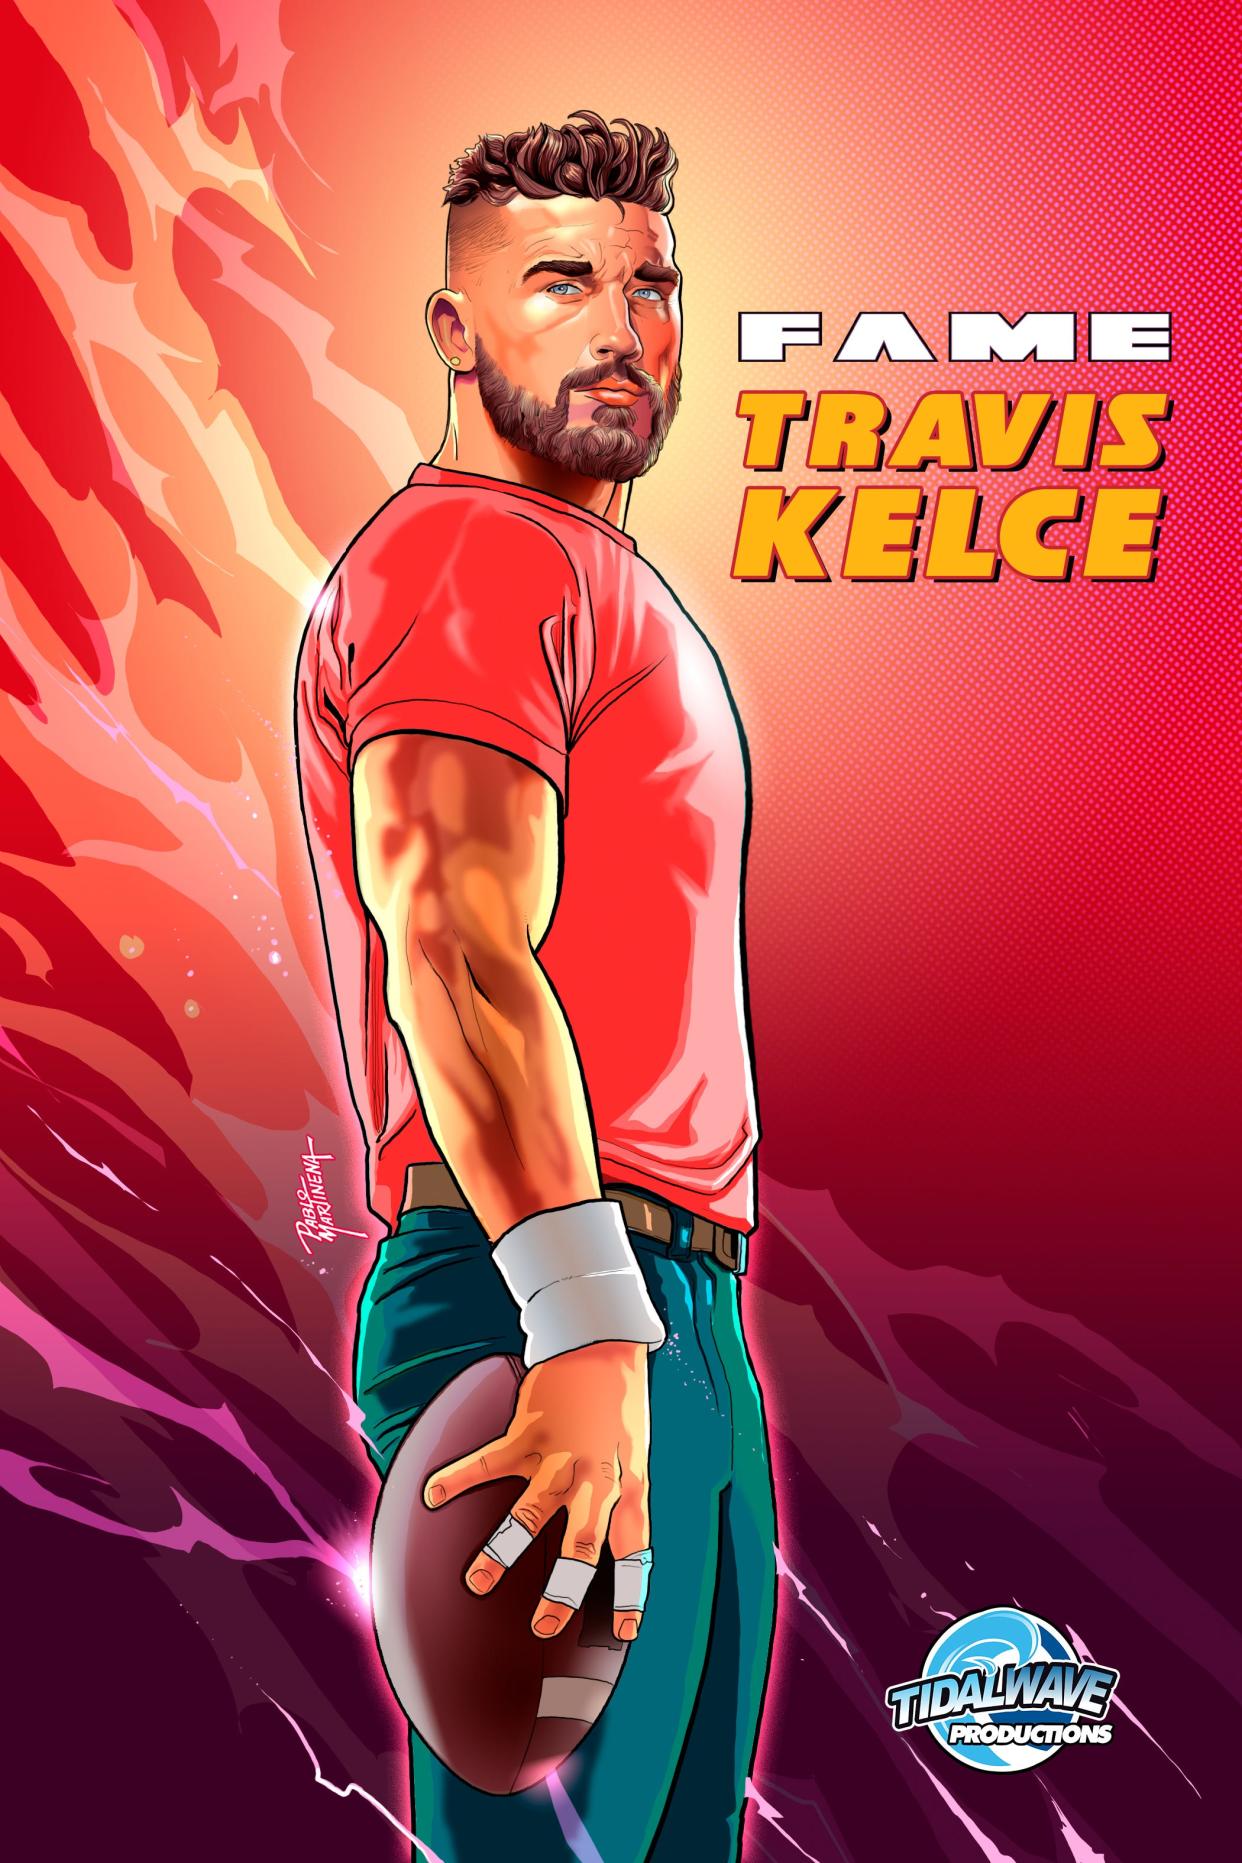 "Fame: Travis Kelce" is the latest comic book published by TidalWave Productions, a comic book and graphic novel publisher. "Fame: Travis Kelce" is available for $7.99.